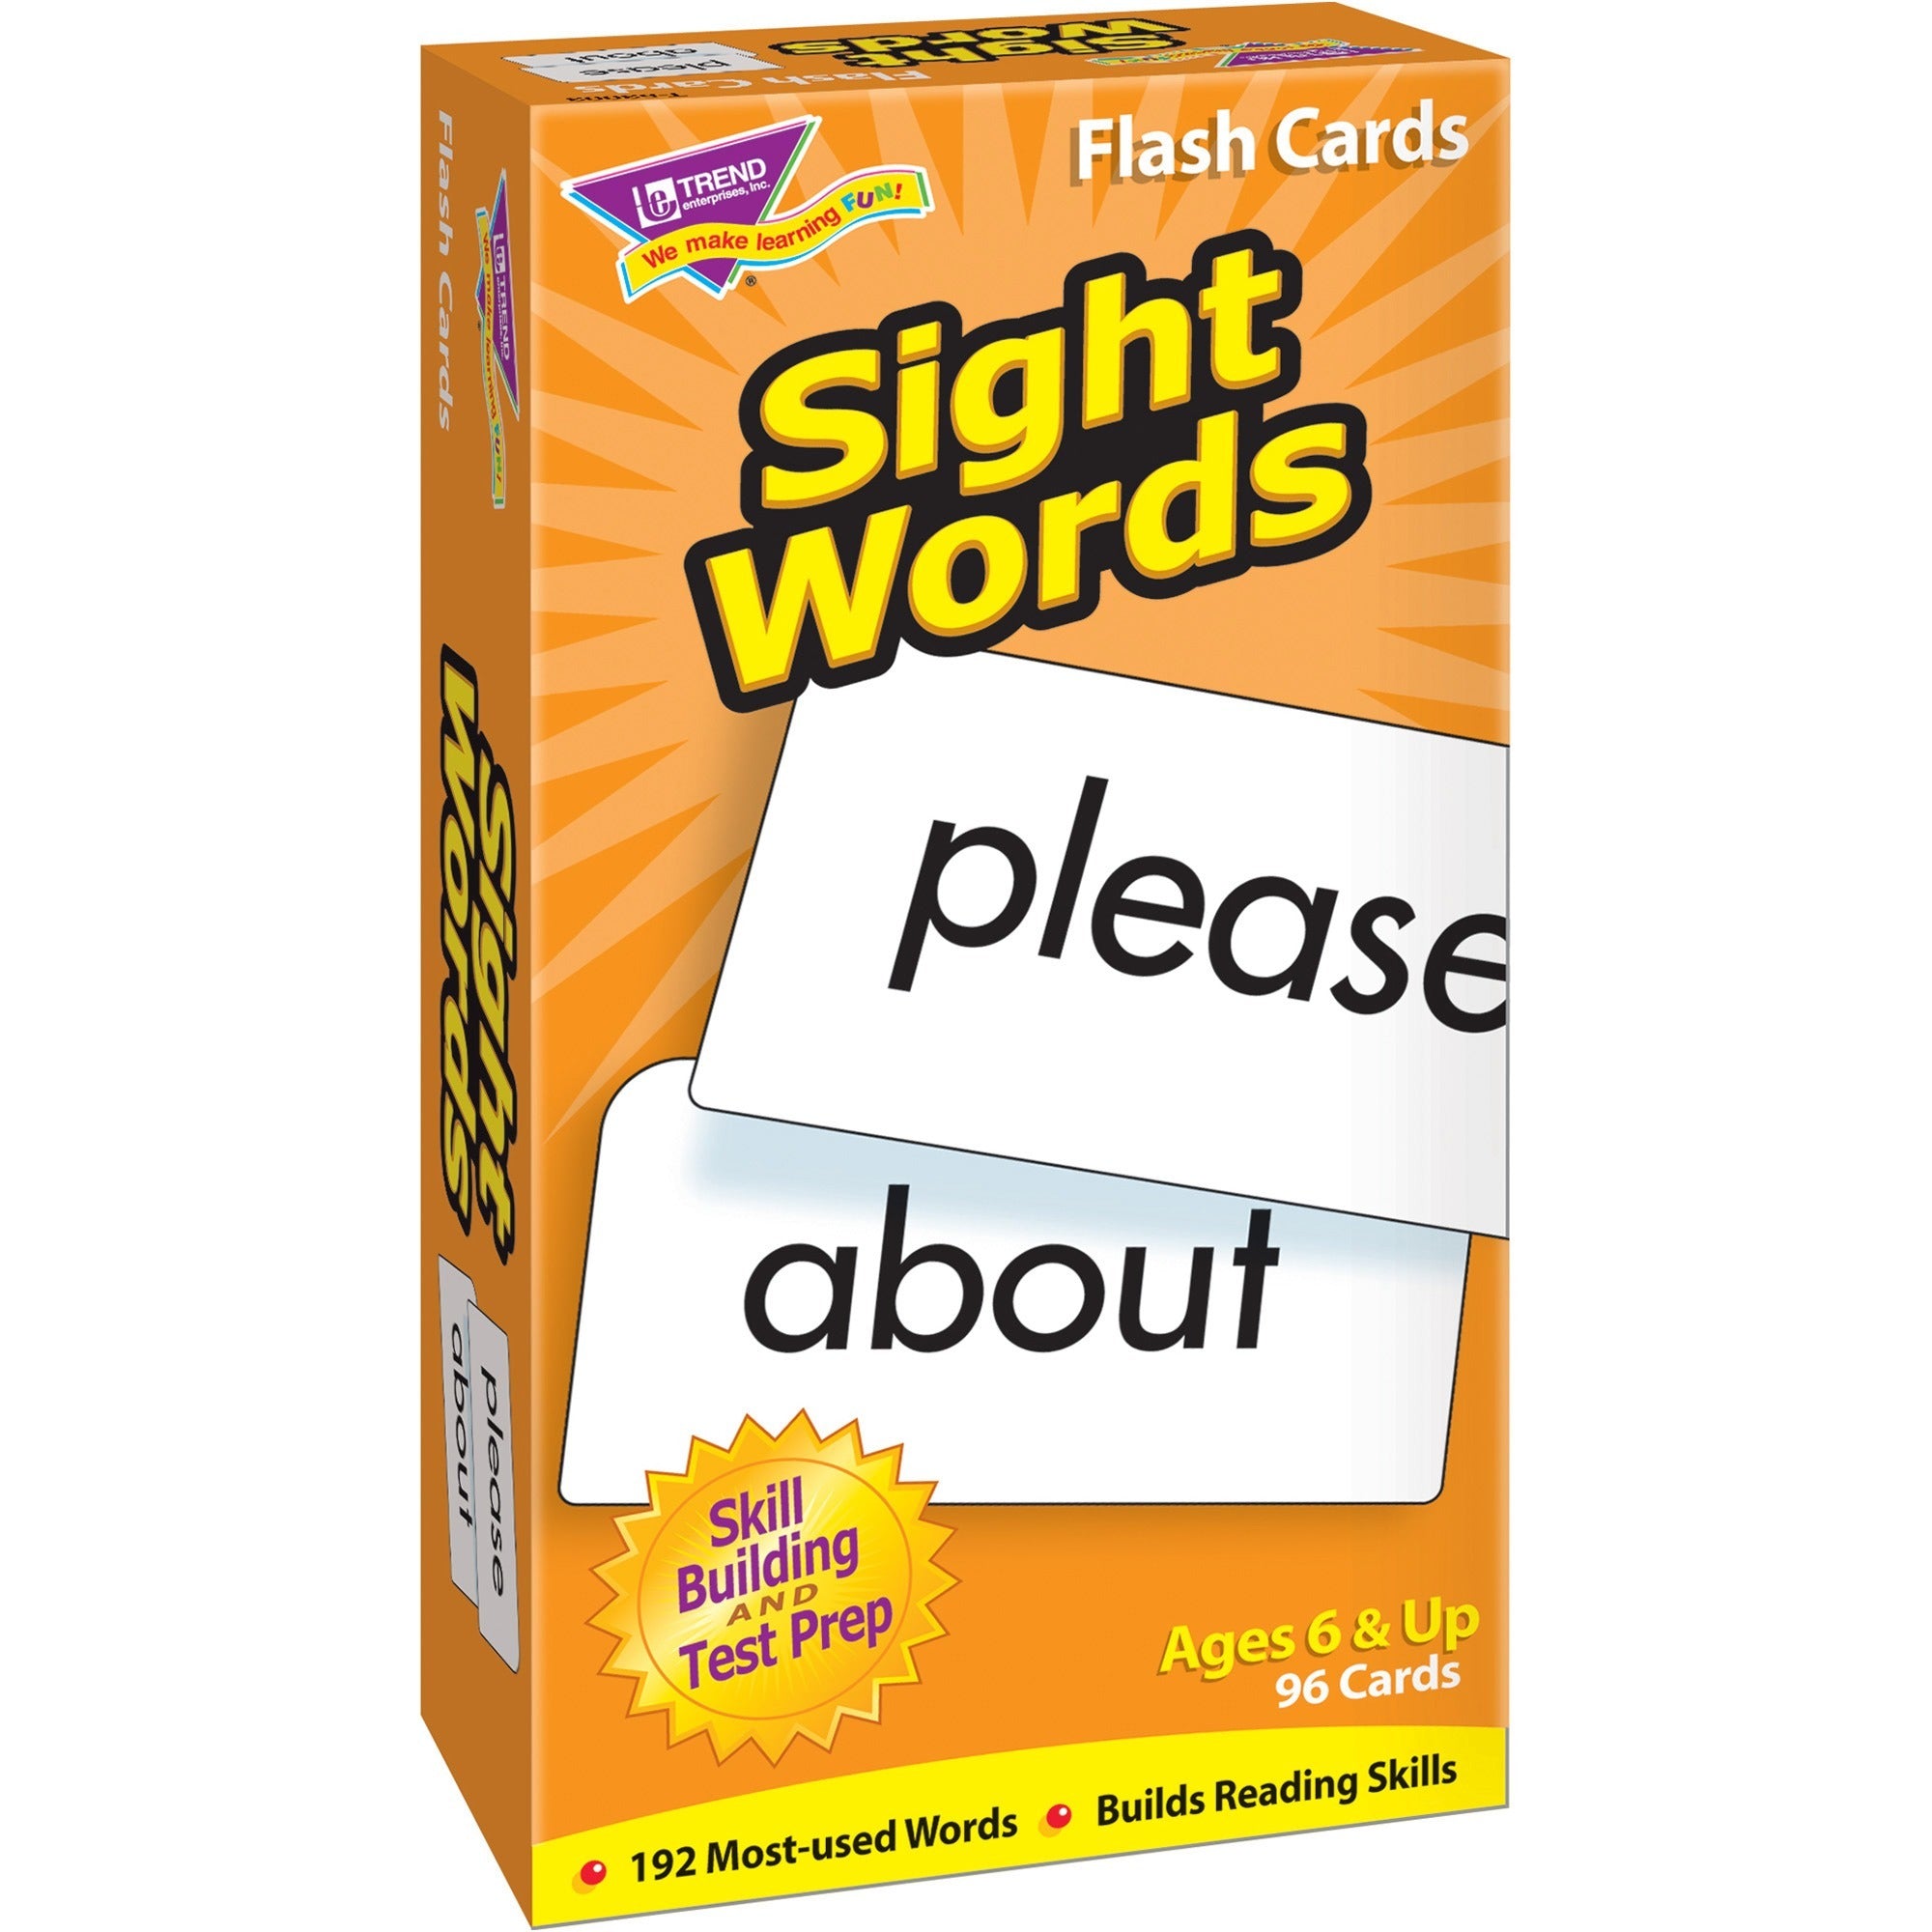 trend-sight-words-skill-drill-flash-cards-educational-1-each_tep53003 - 1